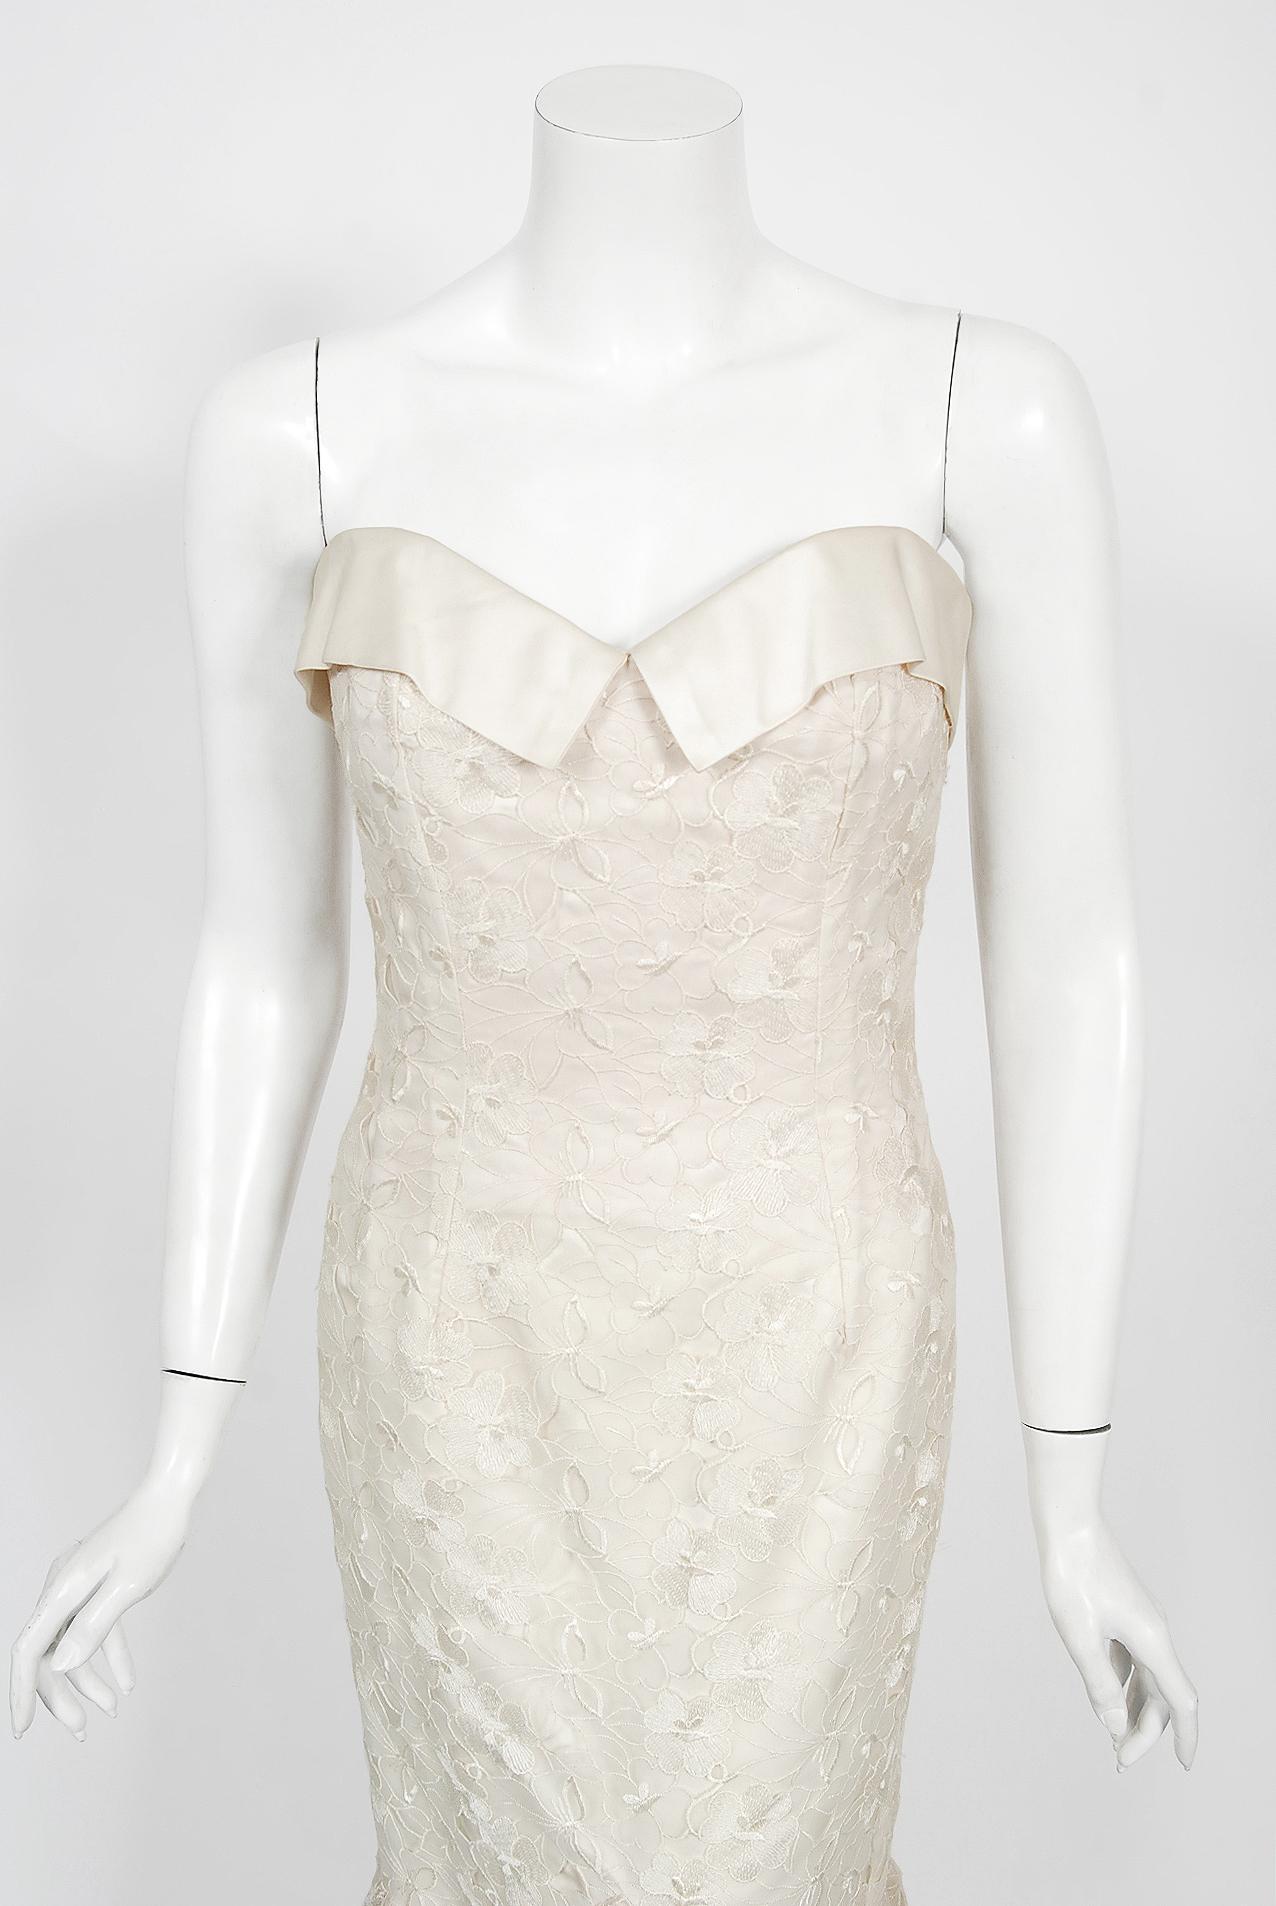 A breathtaking Nolan Miller Couture unworn with tags embroidered silk organza sculpted bridal gown dating back to the early 1990's. Nolan Miller was an acclaimed costume designer best known for his work on the long-running series Dynasty. Miller was